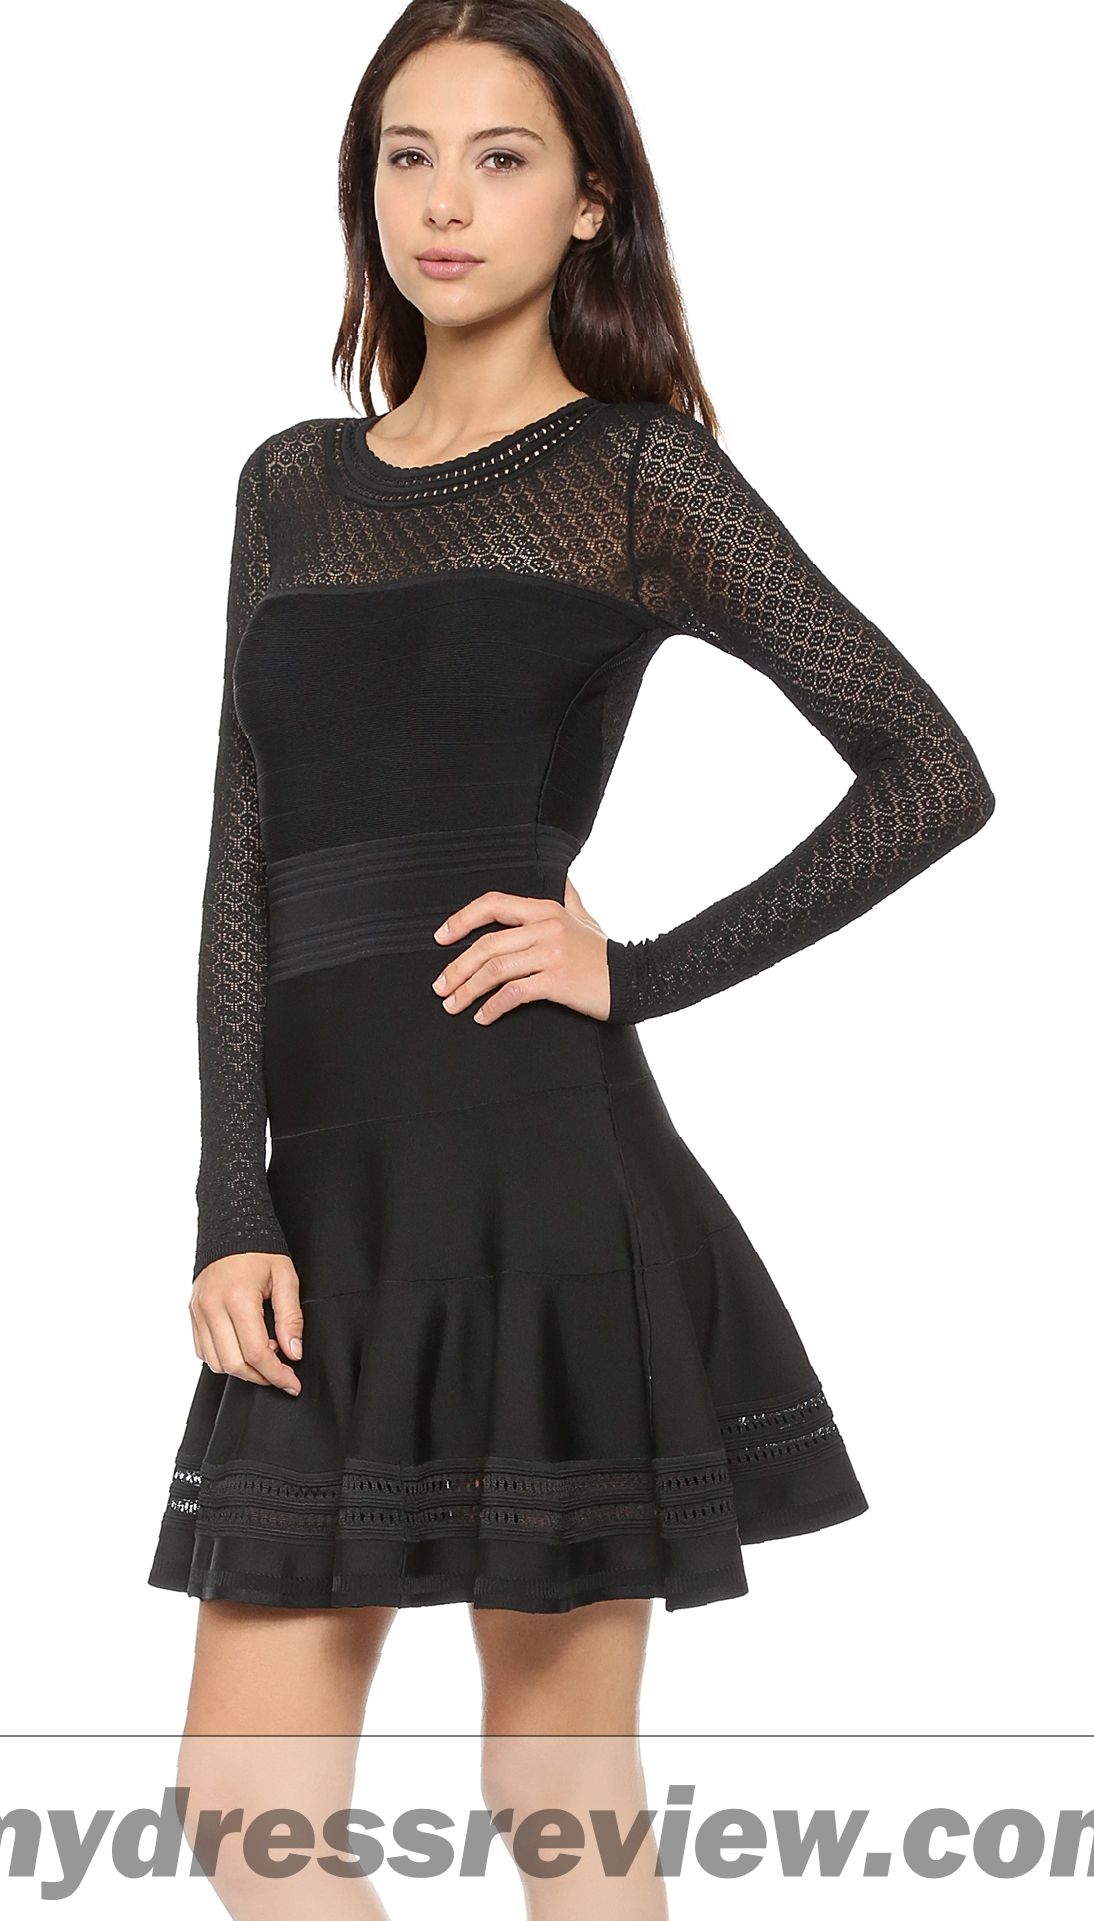 Black Dress With Flared Sleeves And Clothing Brand Reviews